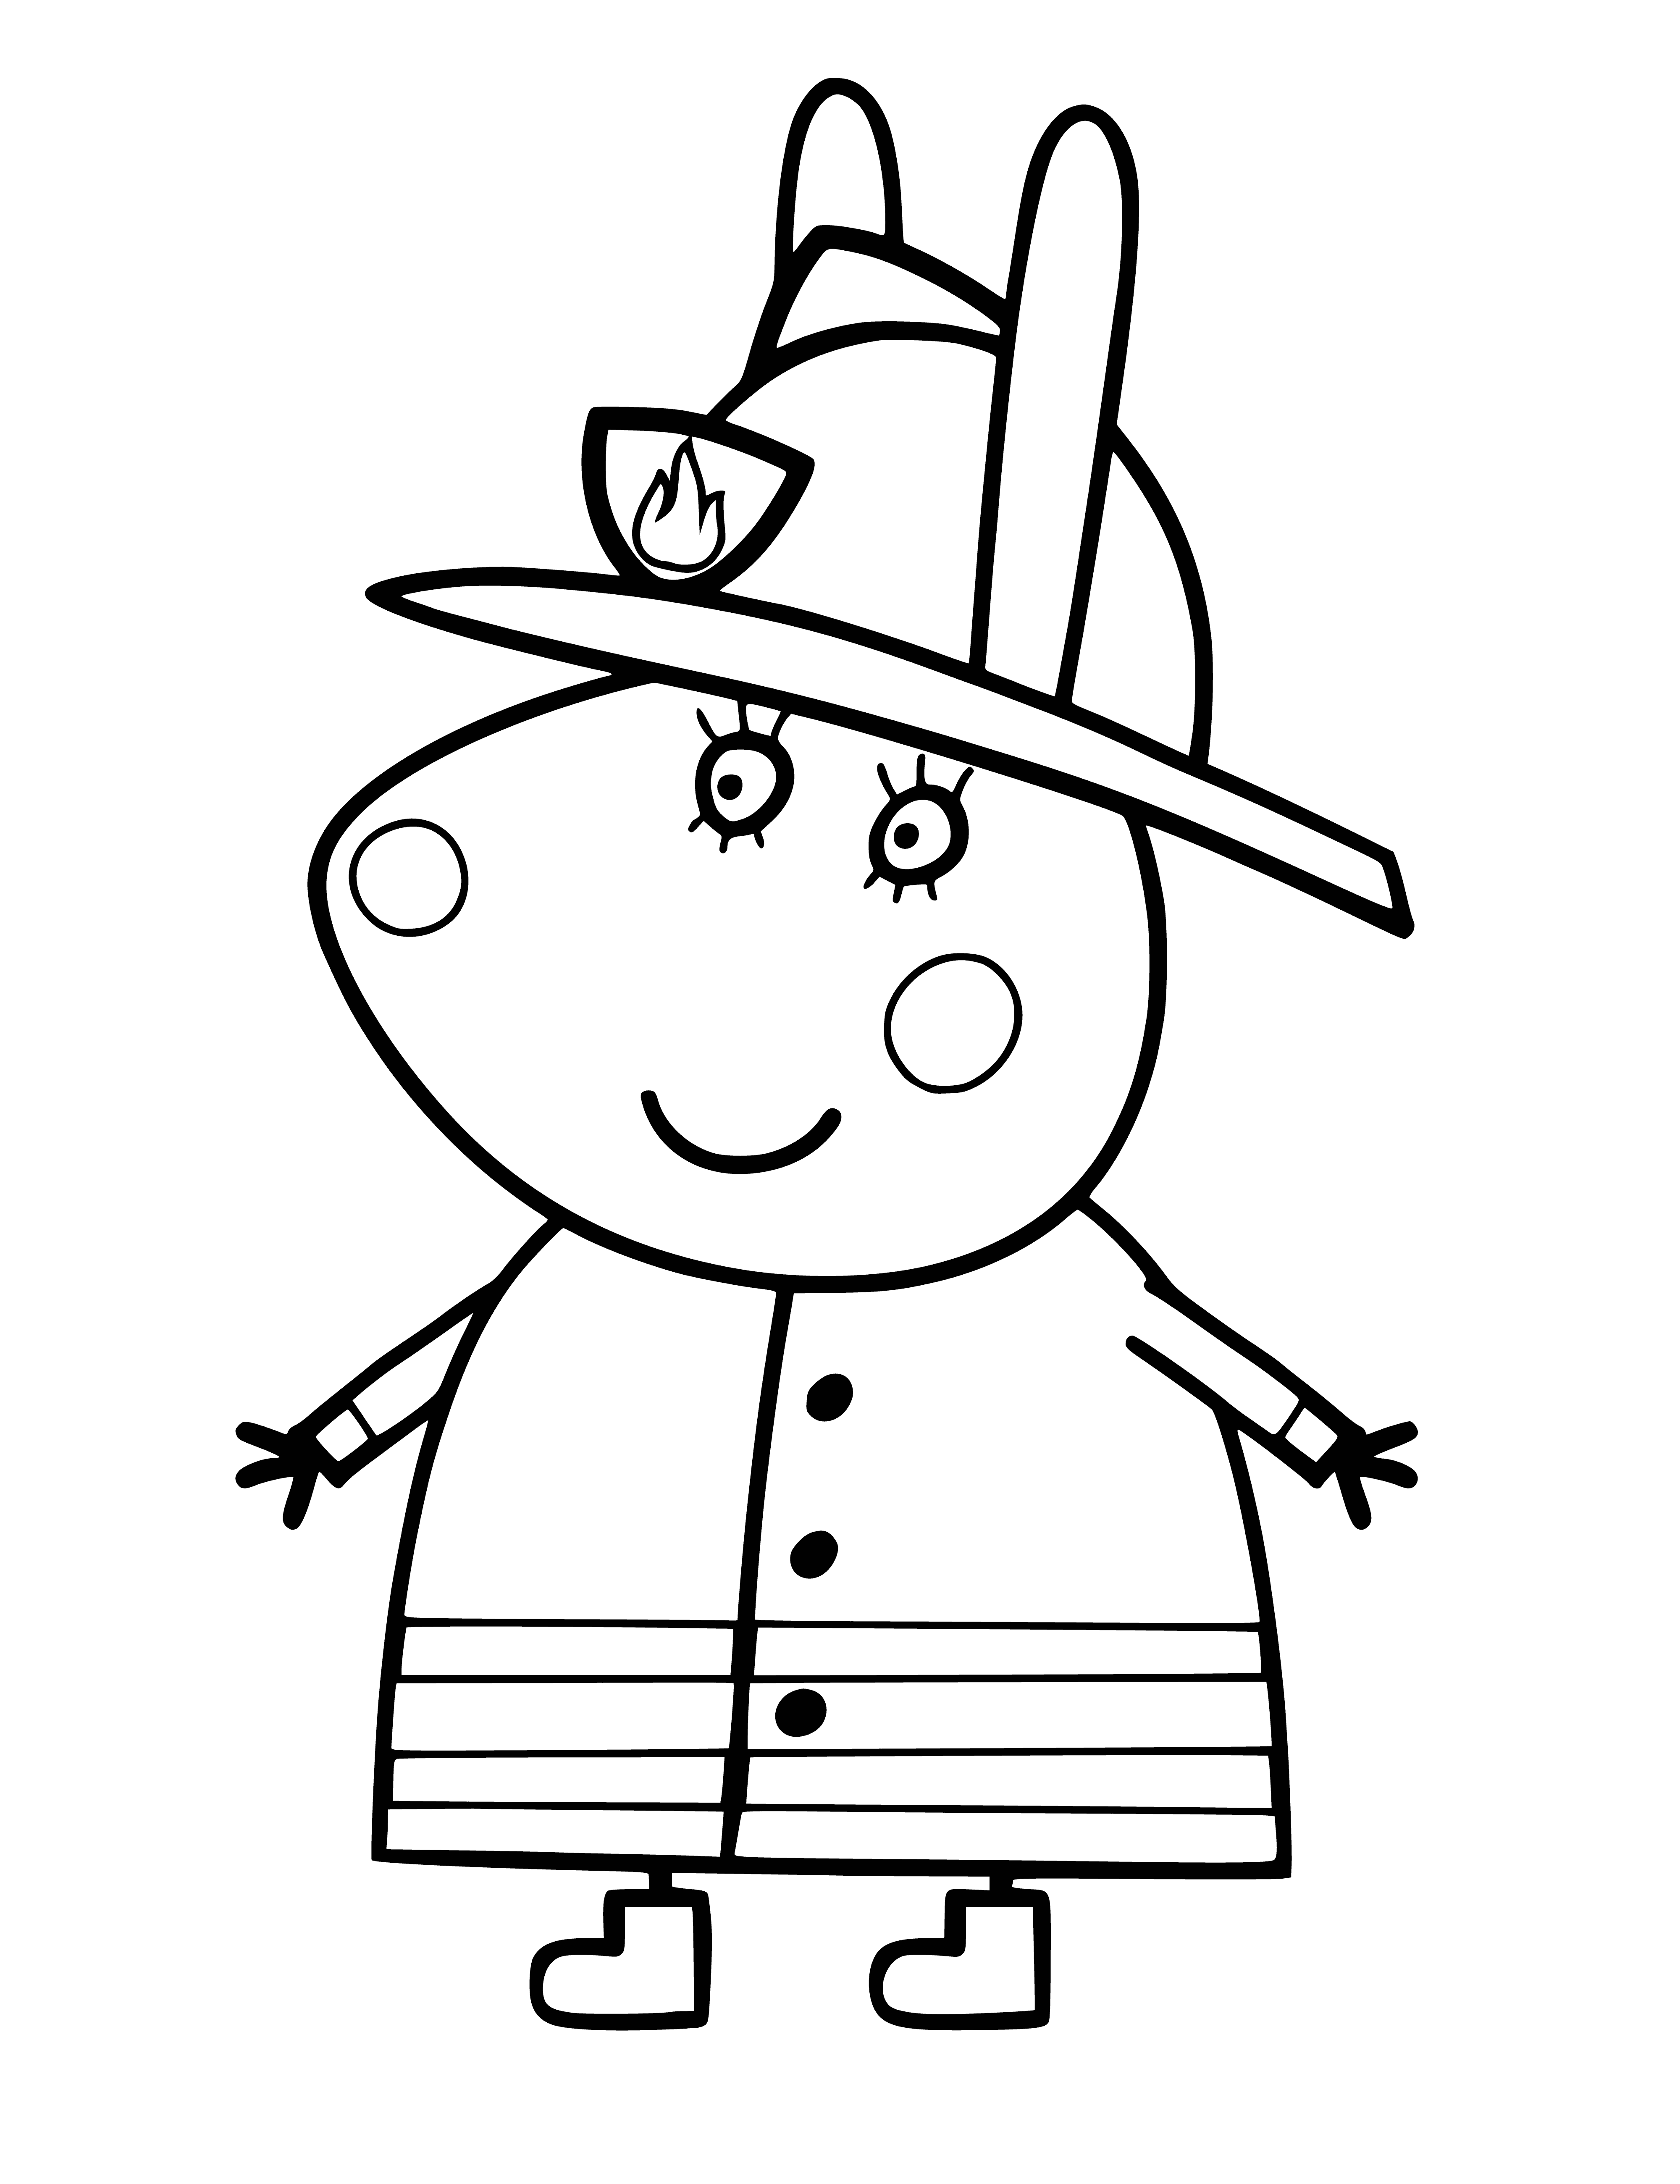 coloring page: Miss Rabbit is Peppa's teacher. Wears purple dress, white flower, has books & blackboard with carrot coloring page.